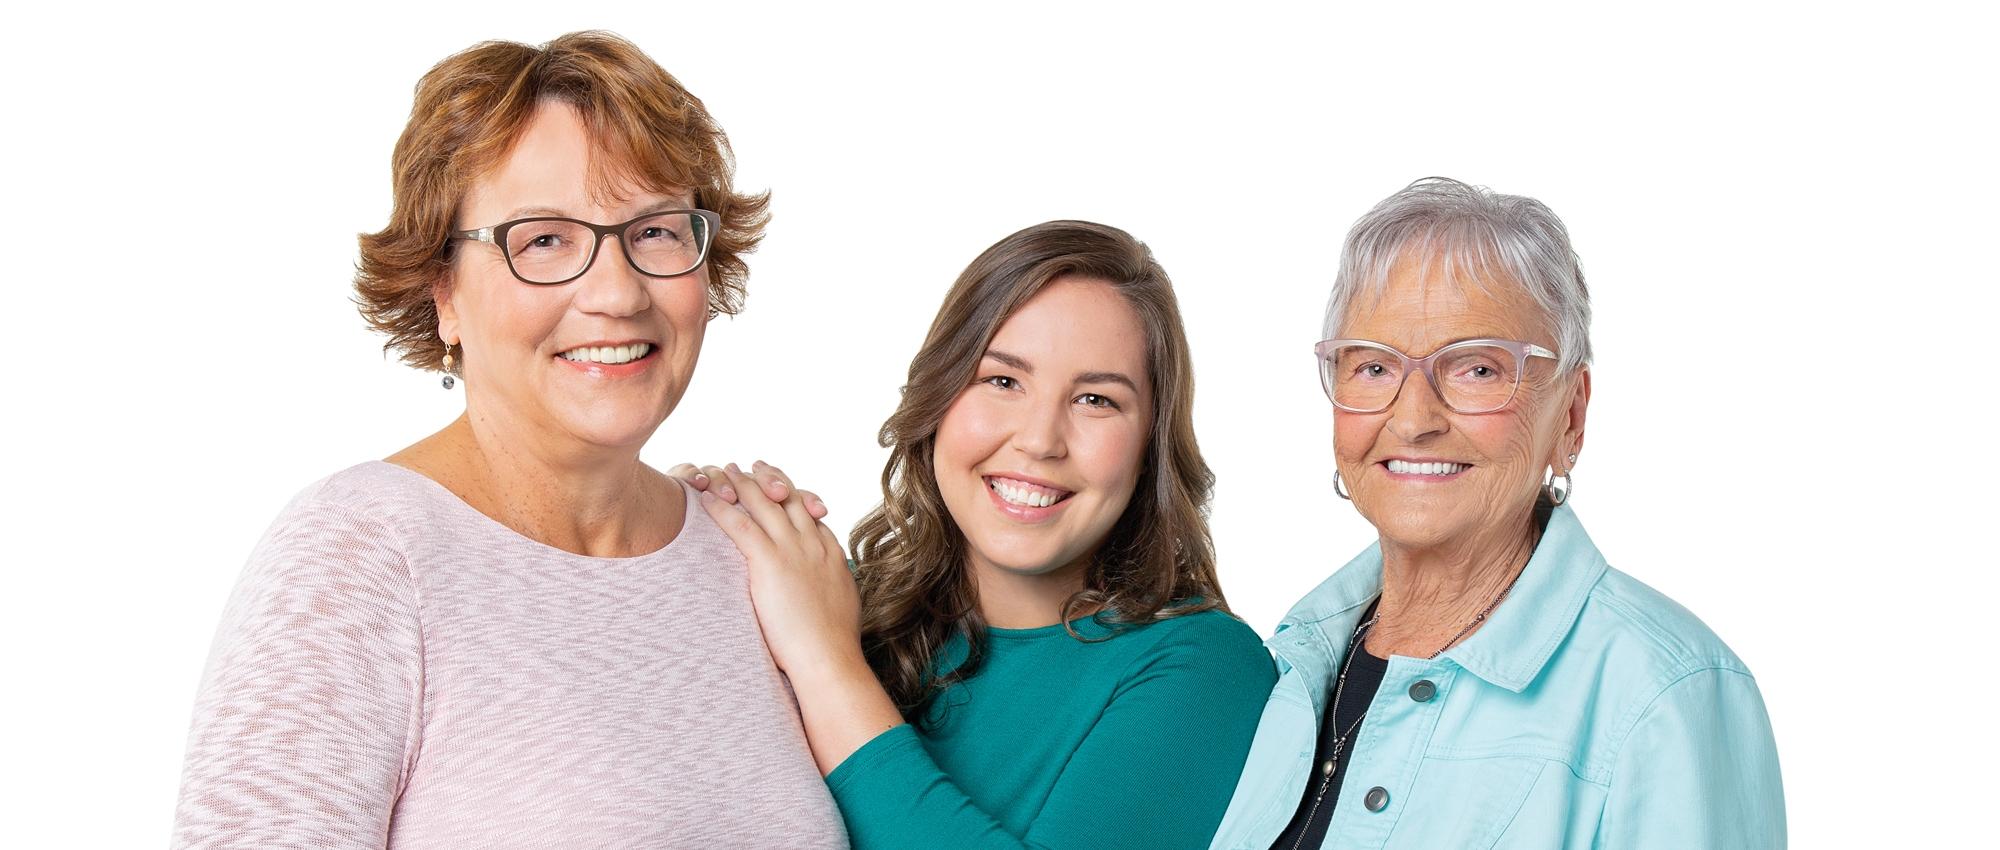 Image of 3 generations of women, mother, daughter and grandmother